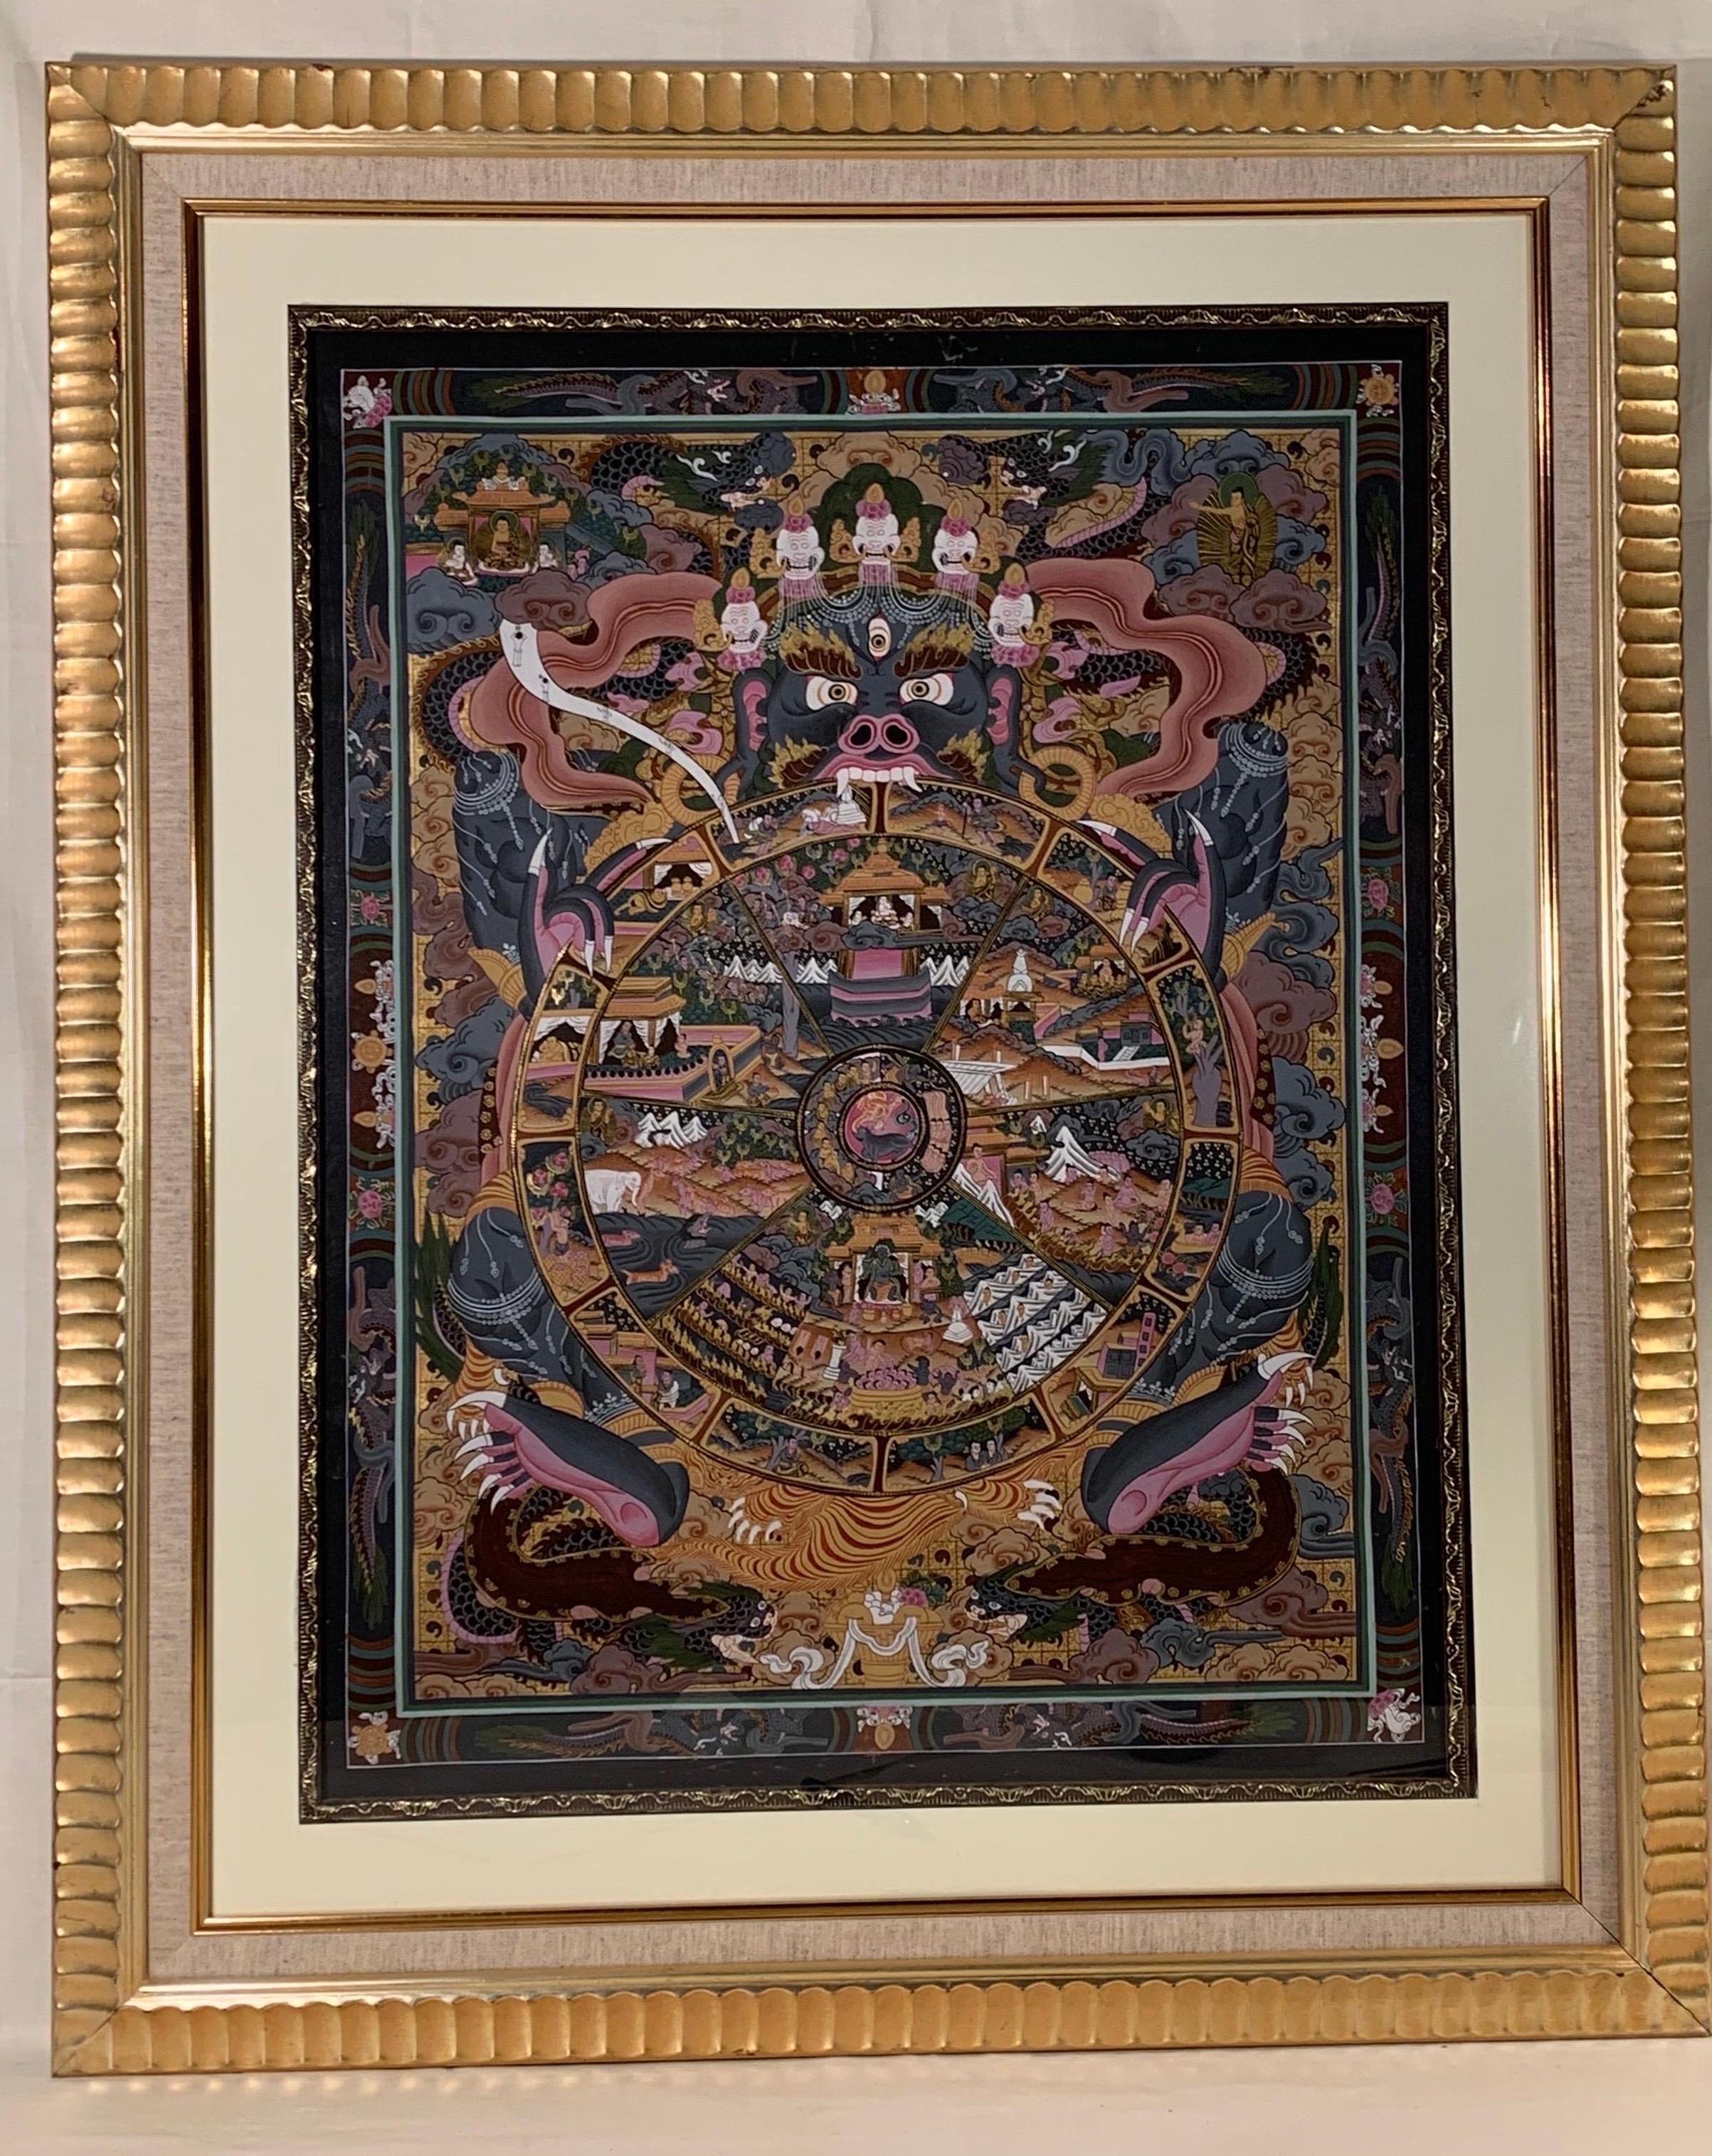 Framed Hand Painted Original Wheel of Life Thangka with 24K Gold on Canvas - Mixed Media Art by Unknown